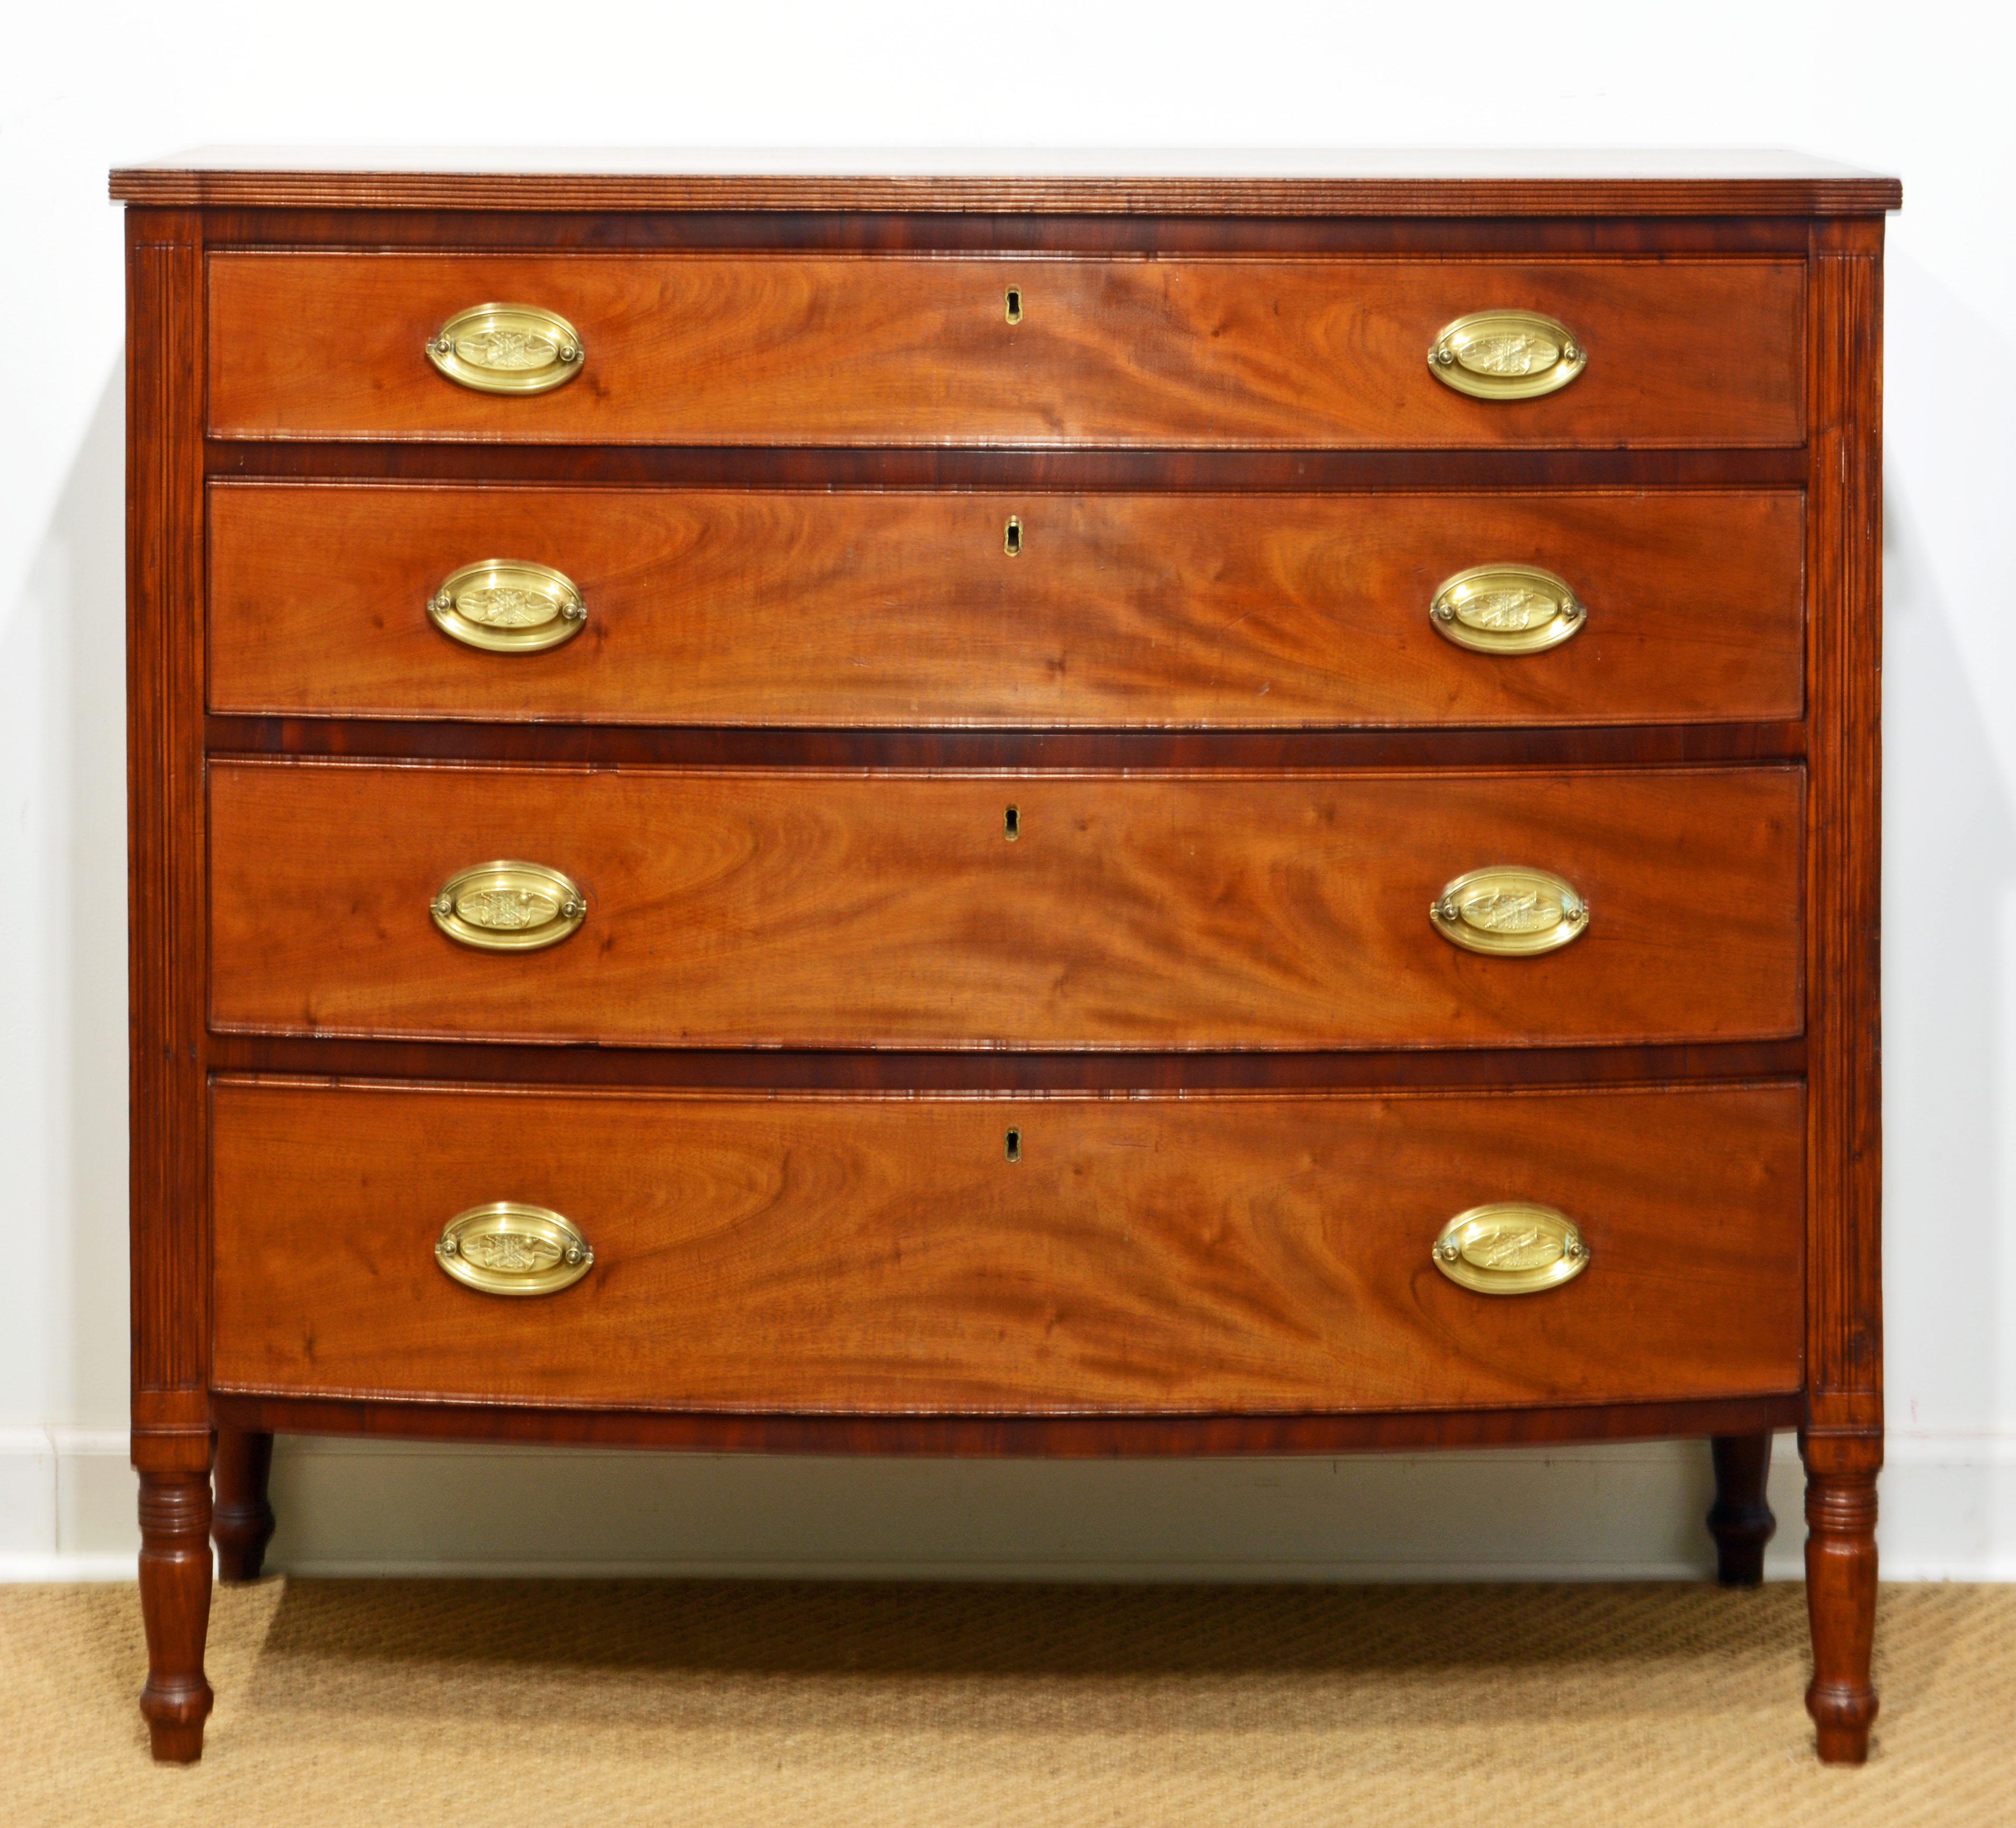 Southern Federal Sheraton bowfront chest, walnut with flame mahogany raised edge drawers. Slightly overhanging, shaped and reeded solid walnut top, 4 graduated full-length bow front dovetailed mahogany drawers with the original oval brass pulls and